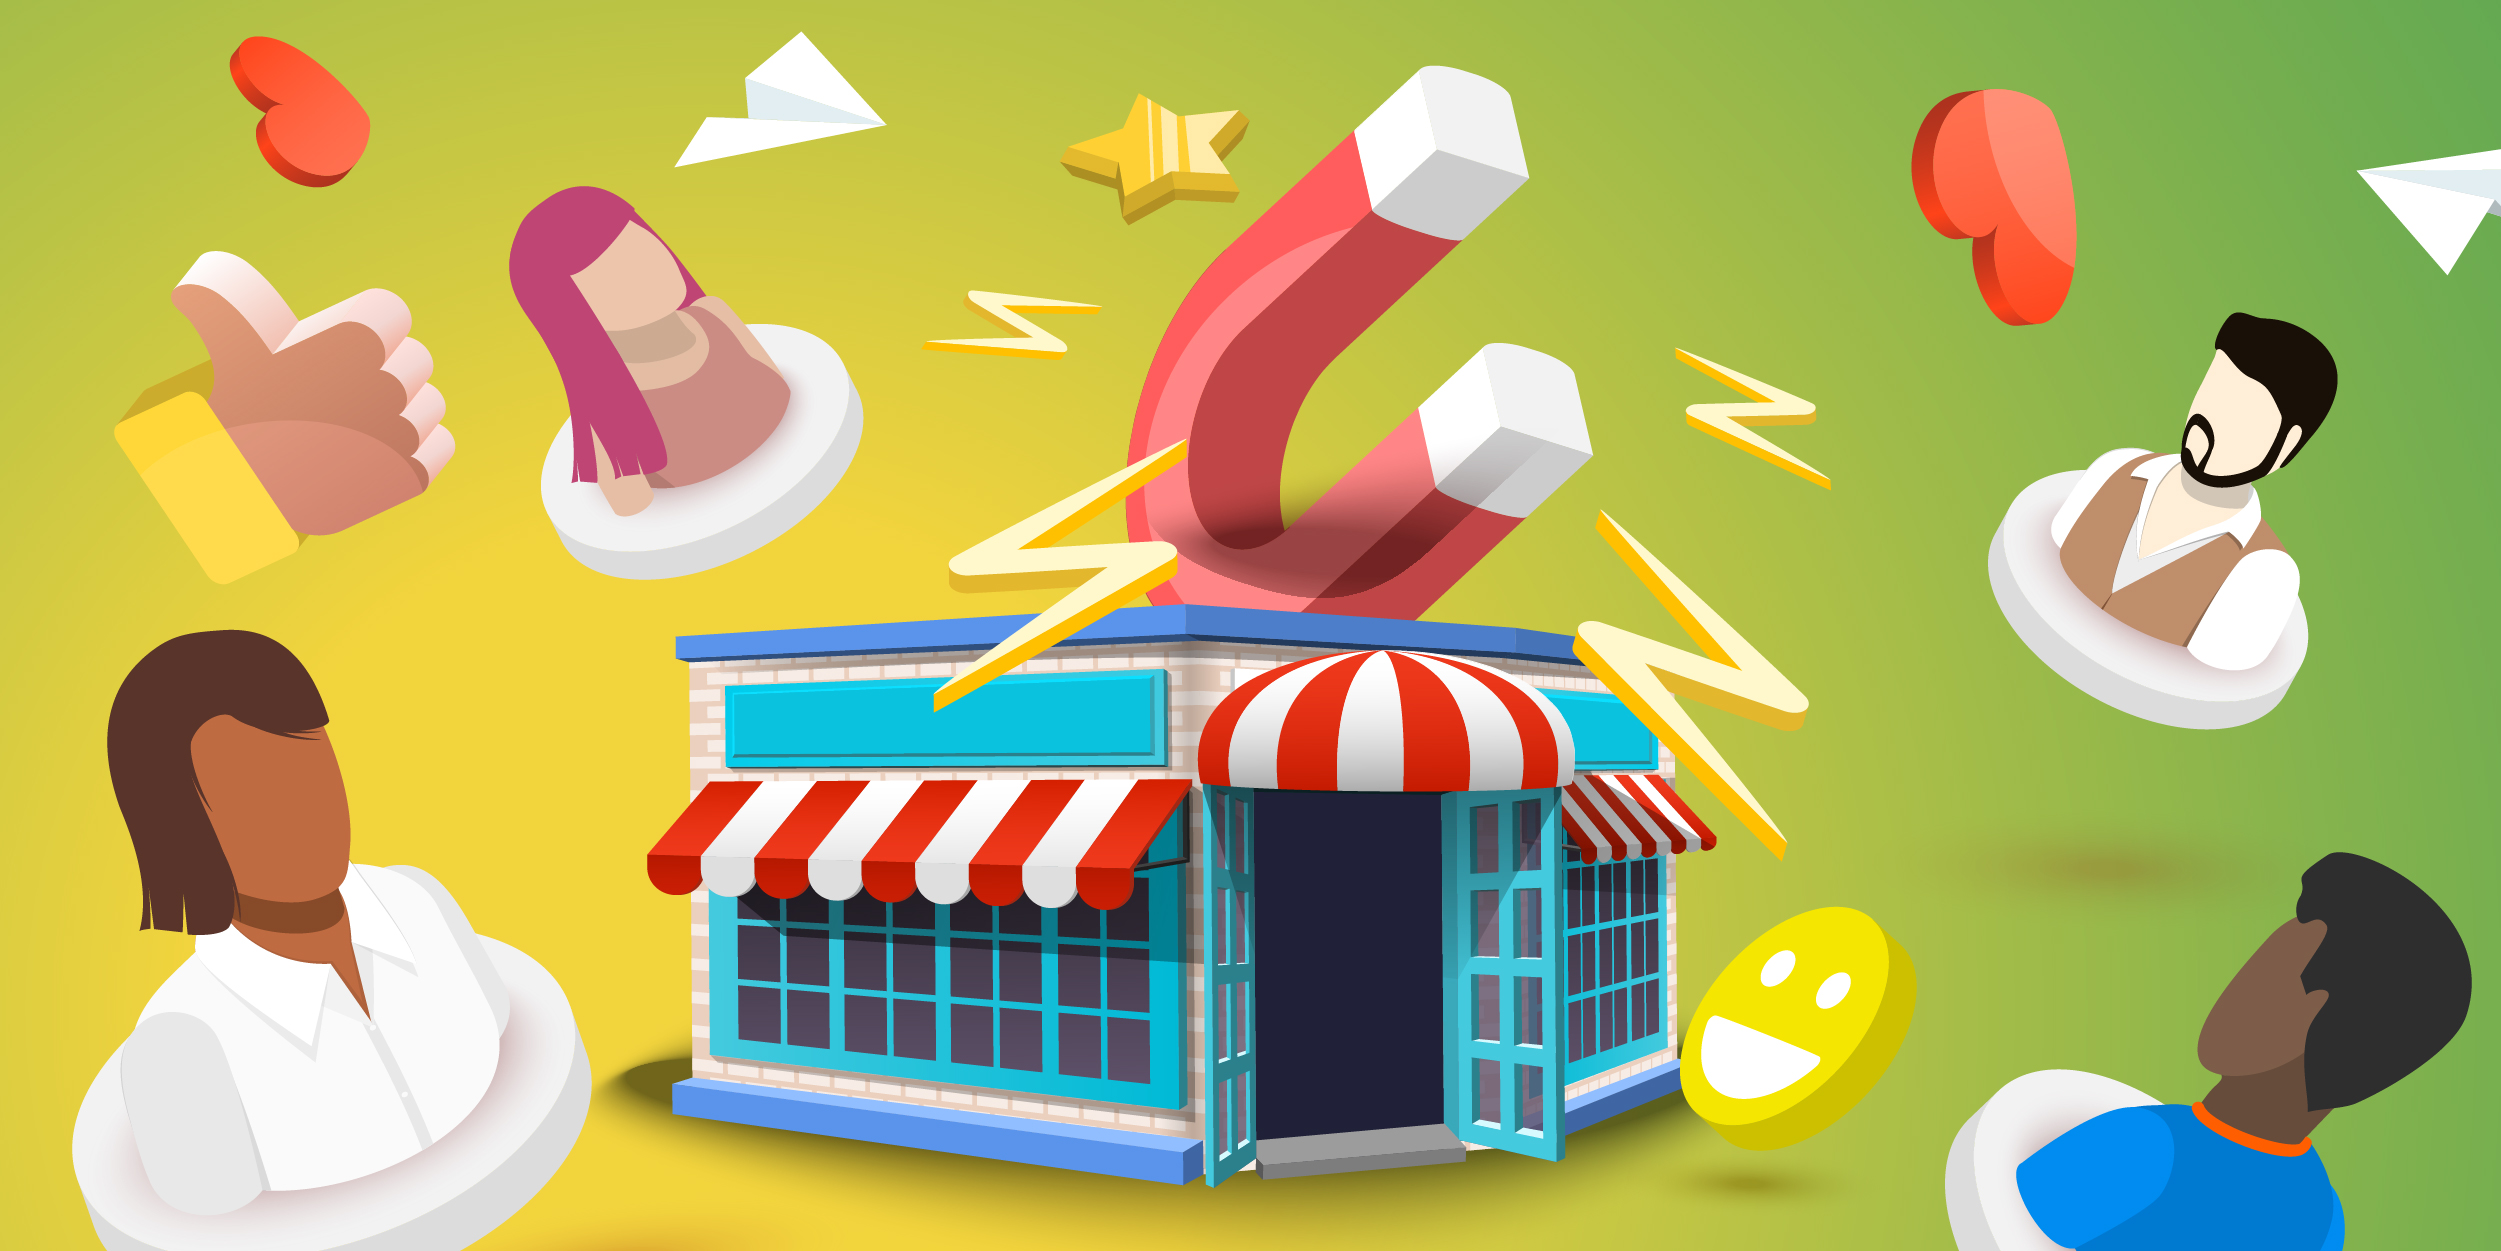 Illustration of a storefront with a magnet coming out of the top attracting people towards it, symbolizing inbound marketing.